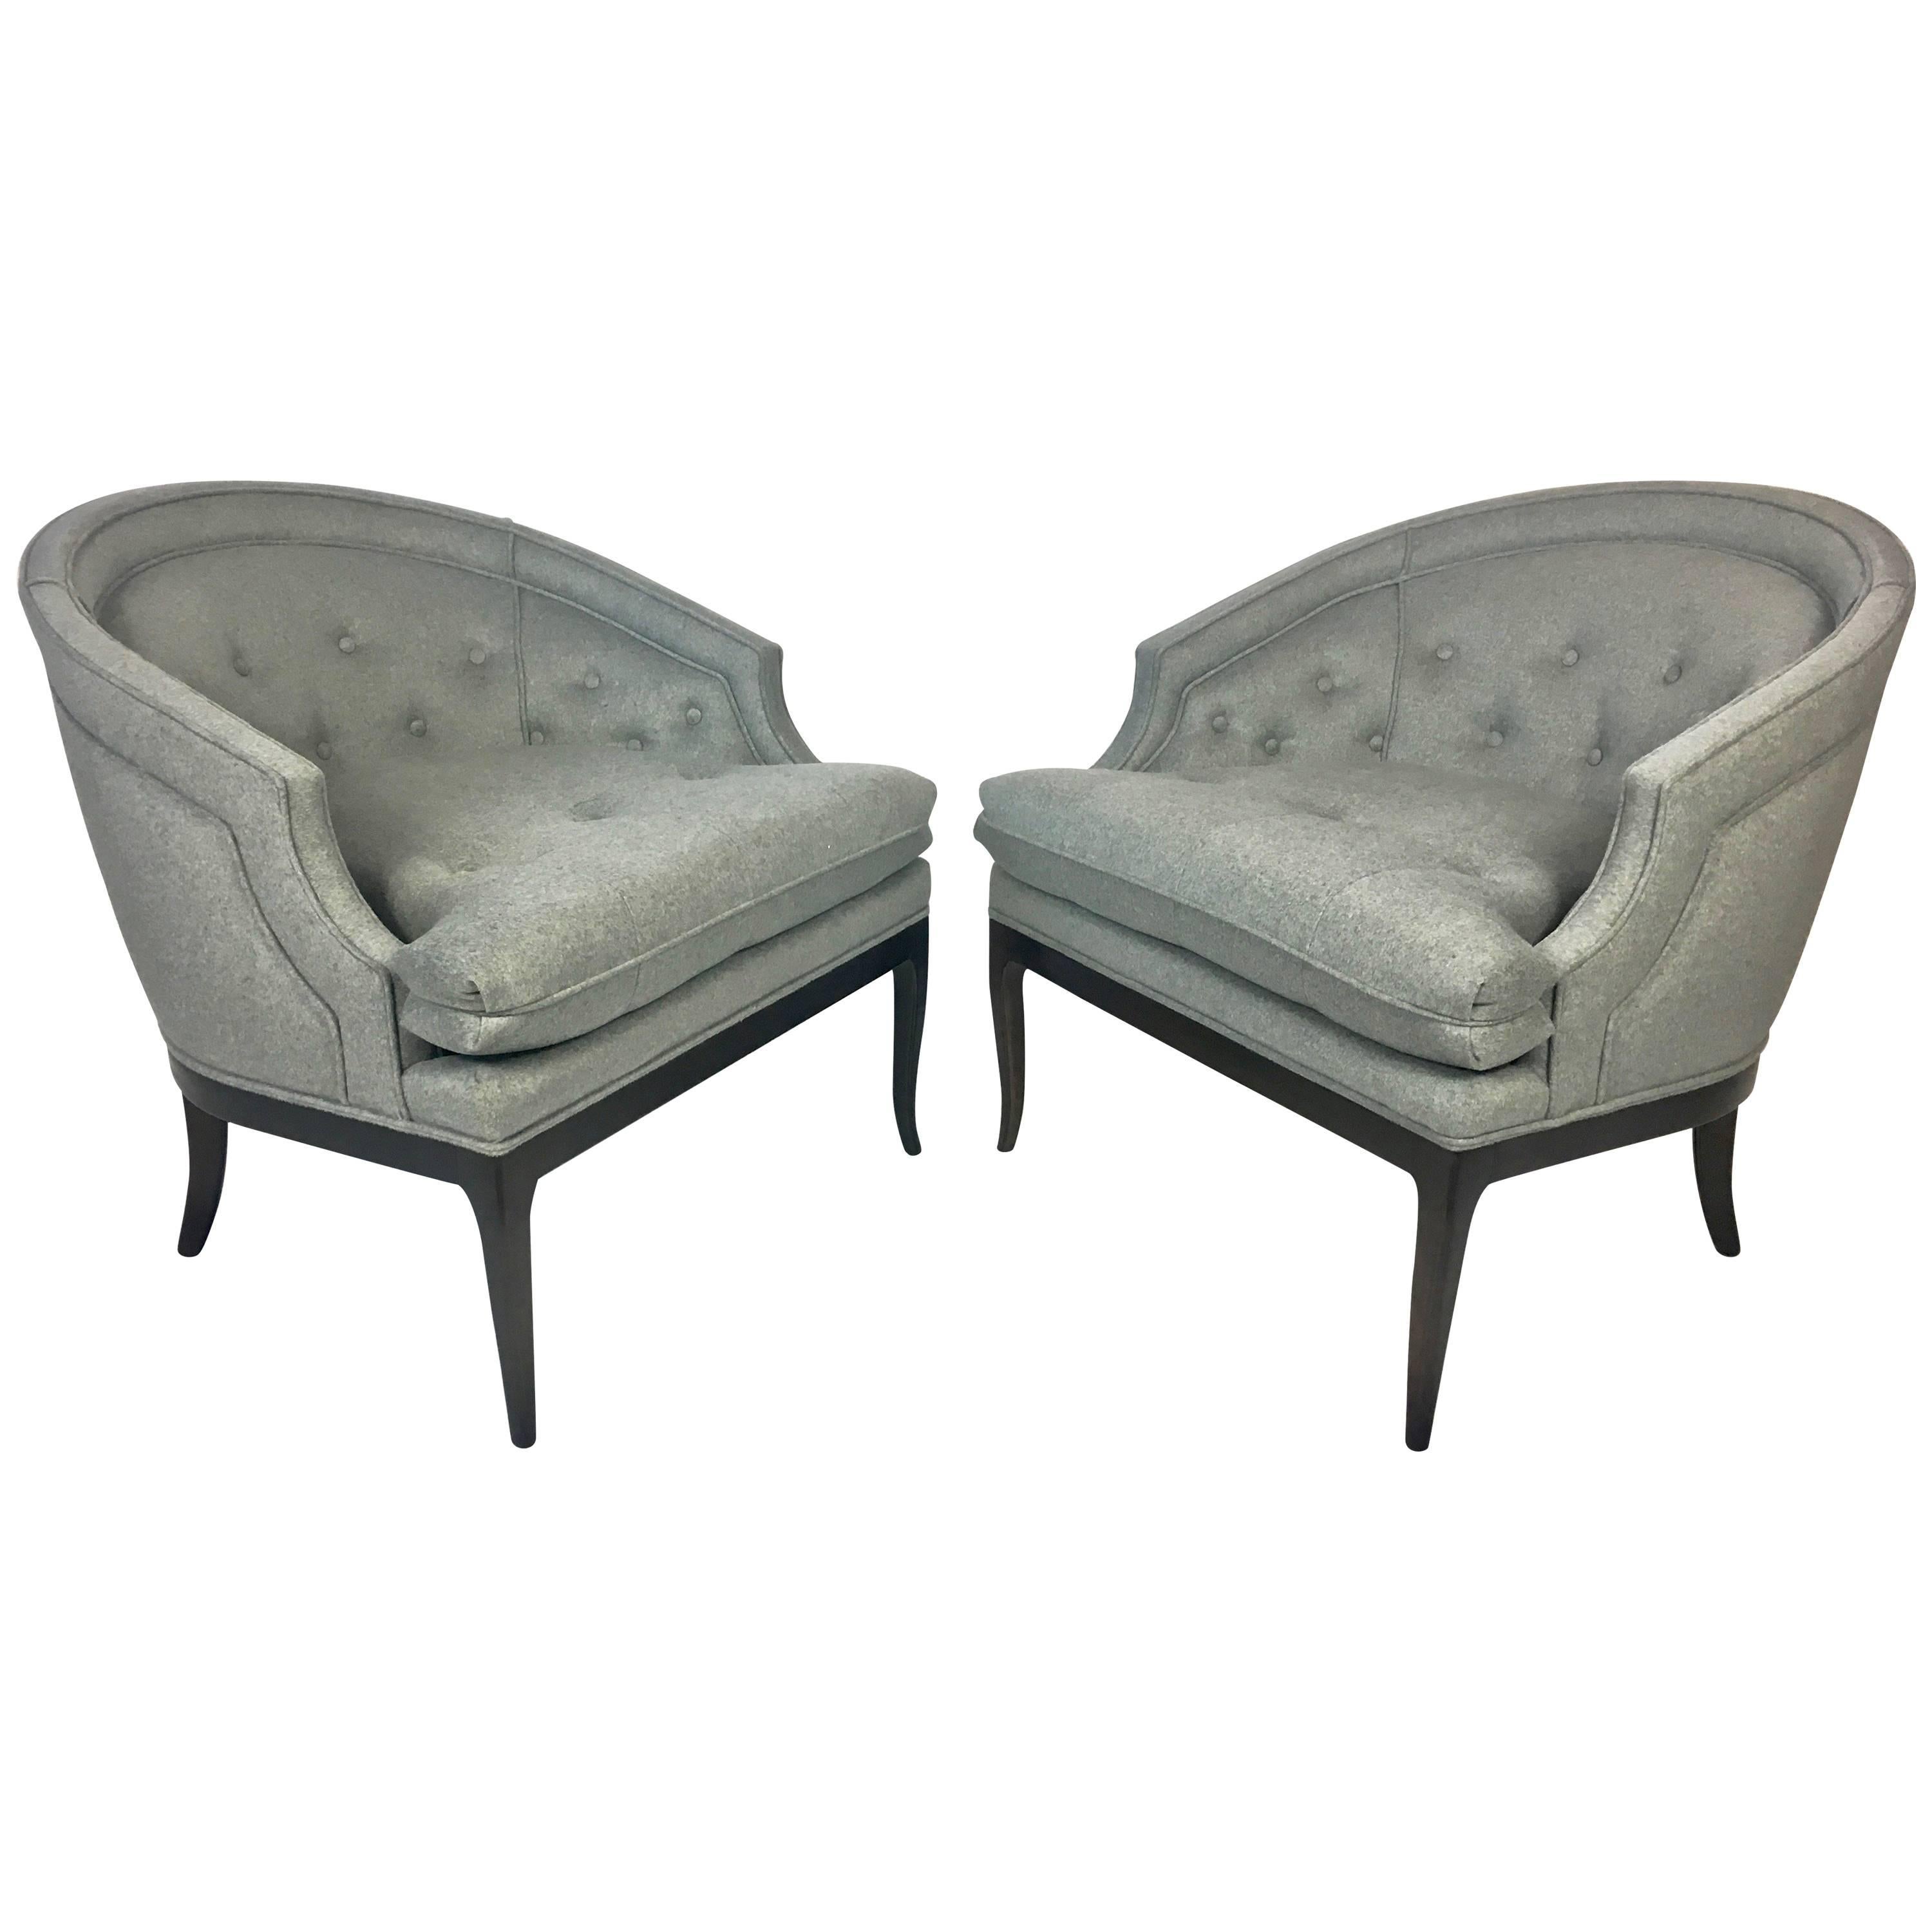 Pair of Labelled Widdicomb Lounge Chairs by T.H. Robsjohn-Gibbings